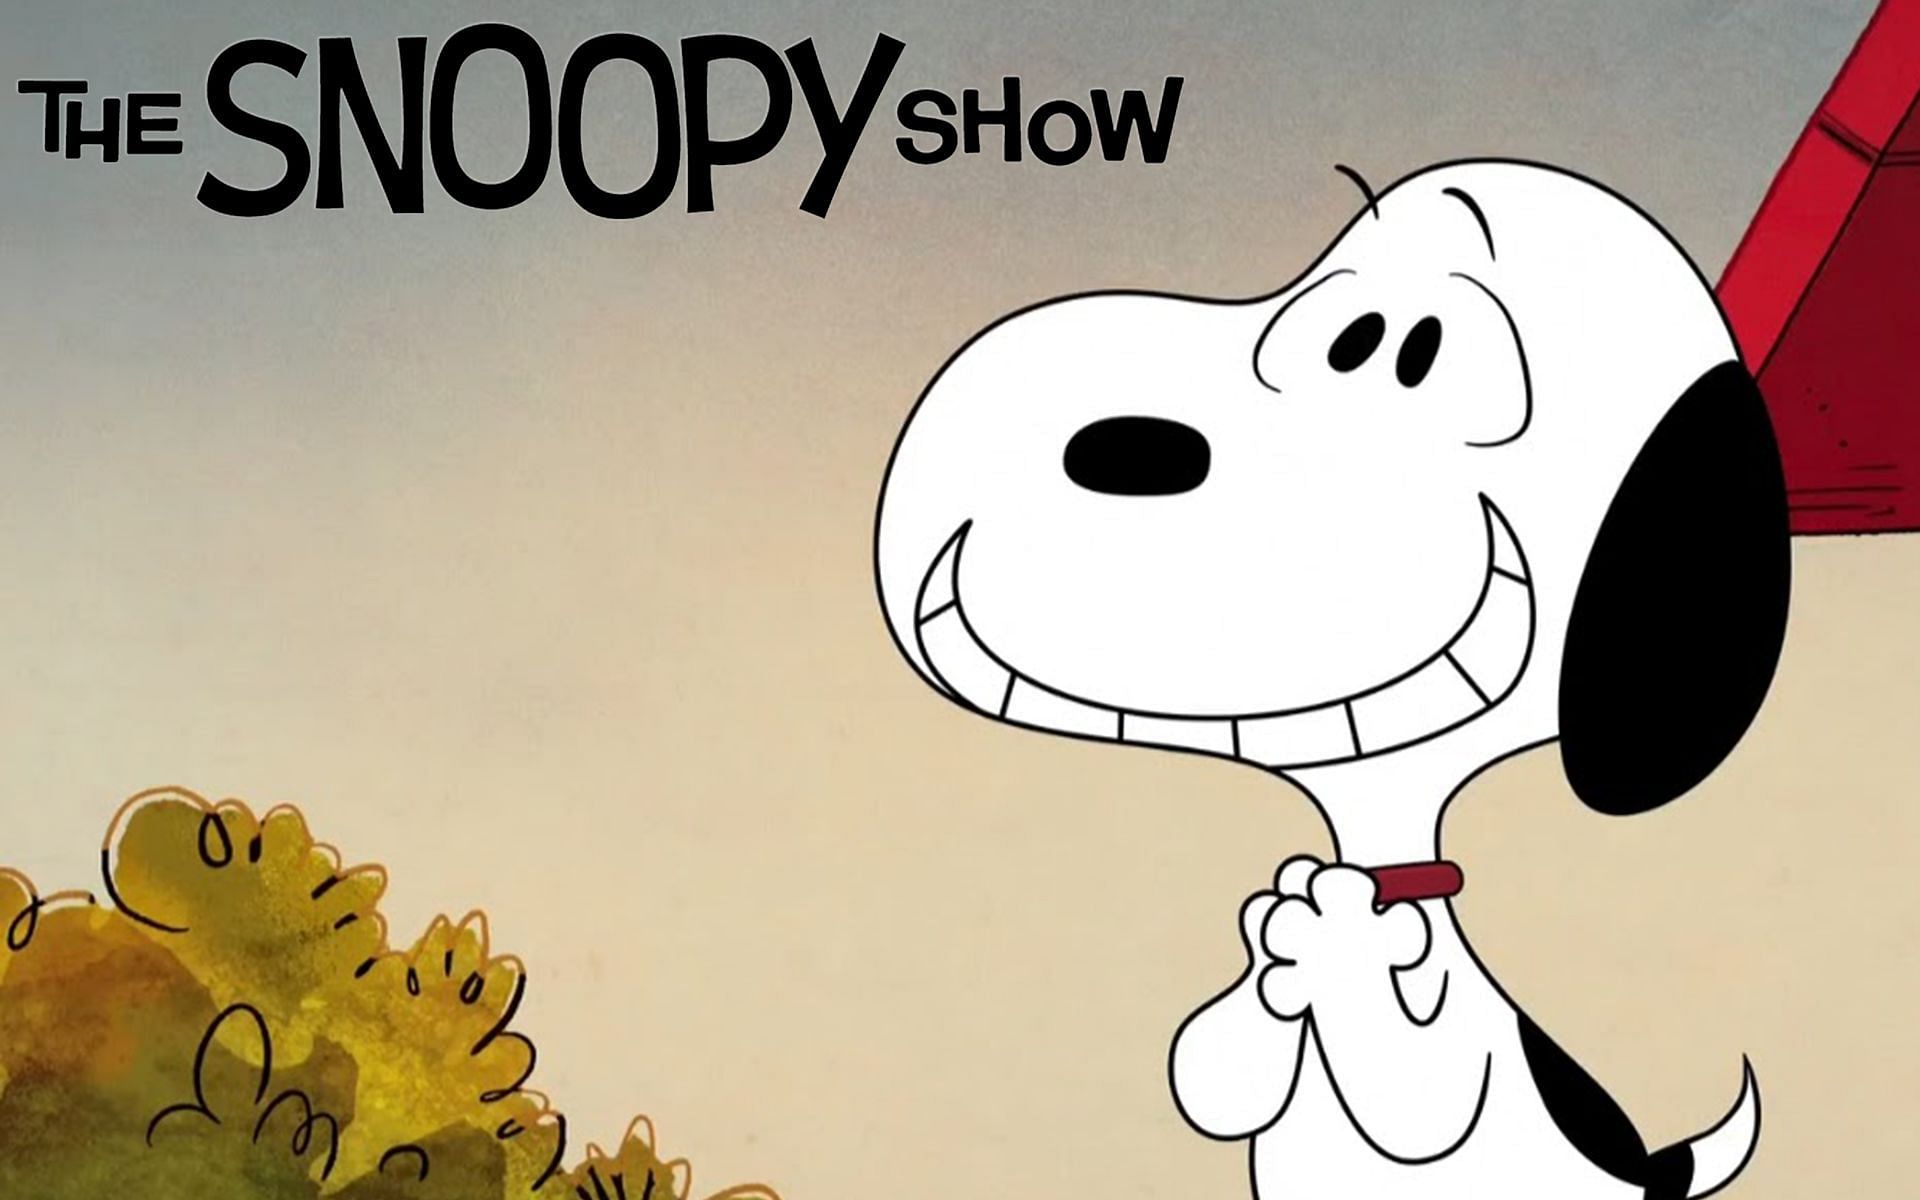 Apple TV+ will debut all six episodes of season 2 of The Snoopy Show on Friday, March 11, 2022. (Image via IMDb)